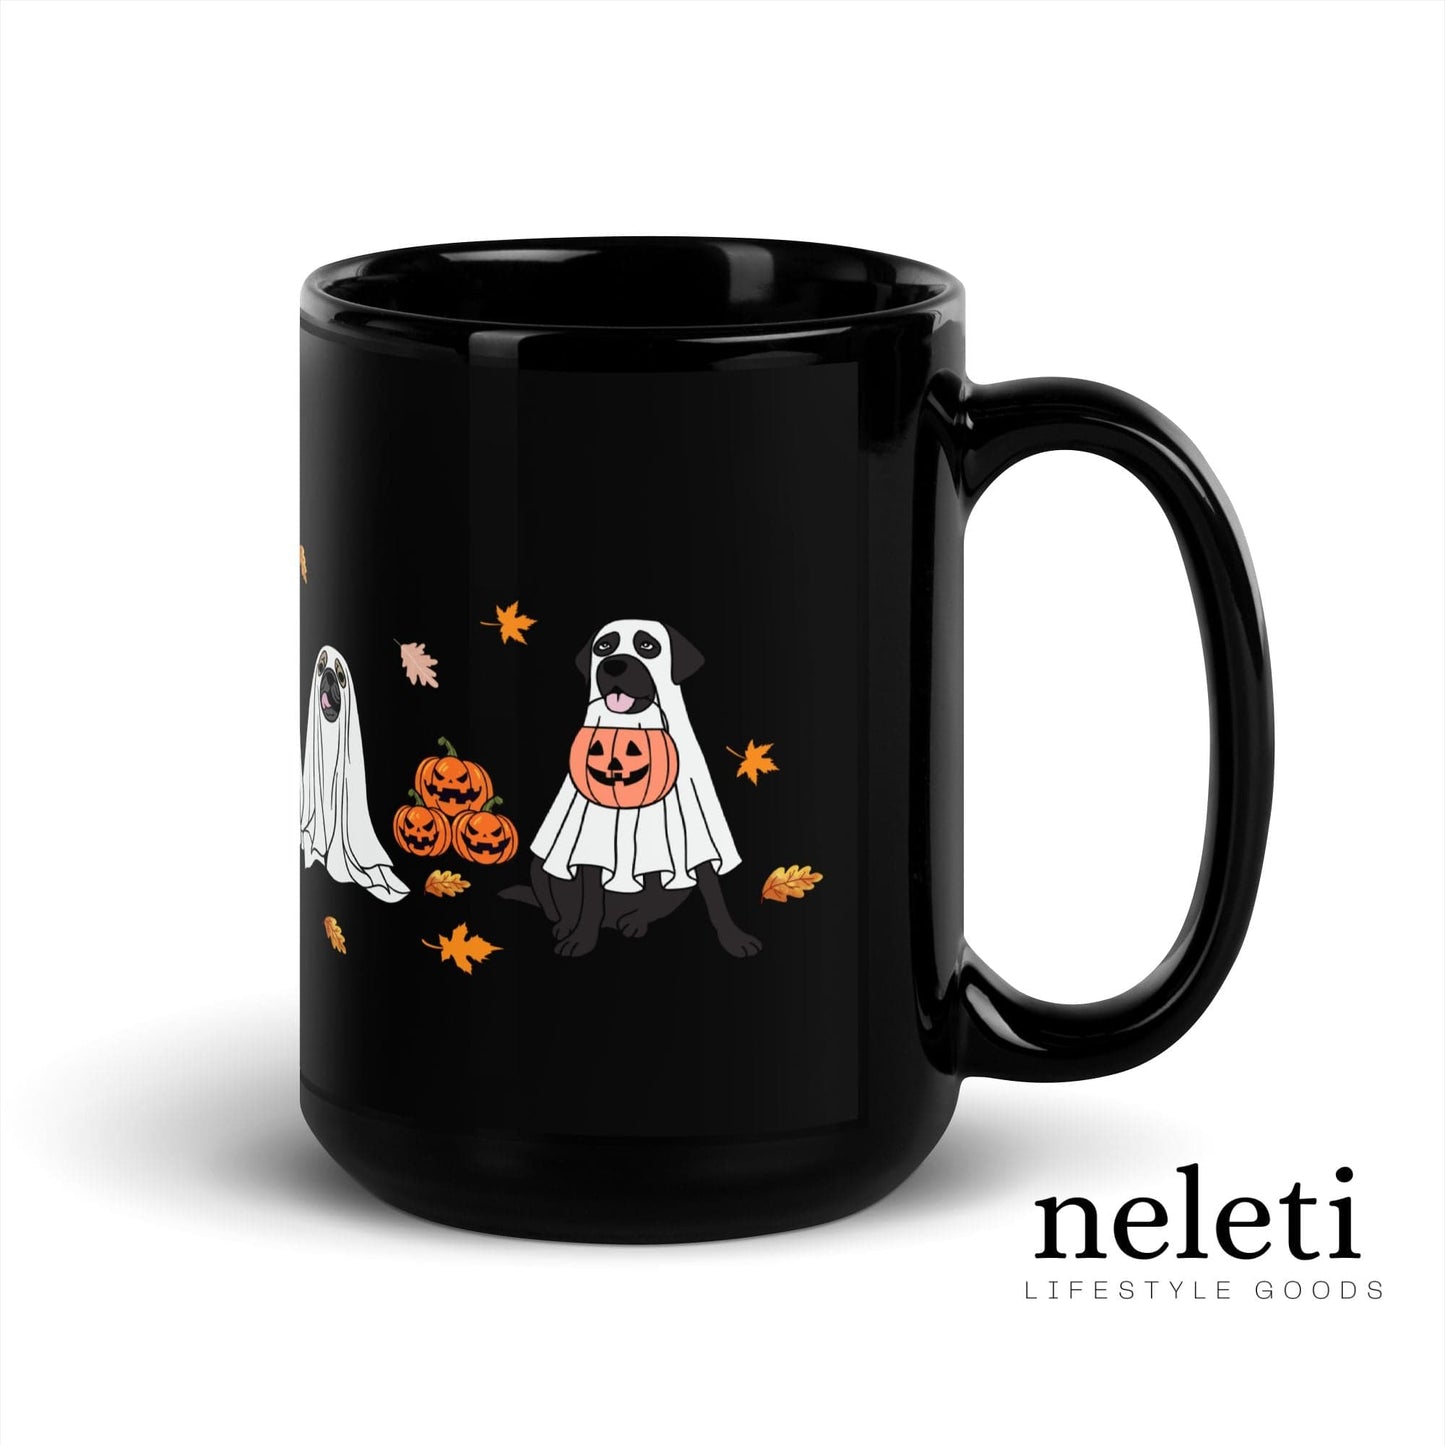 Black coffee mug adorned with Halloween ghost and pumpkin patterns for pet enthusiasts